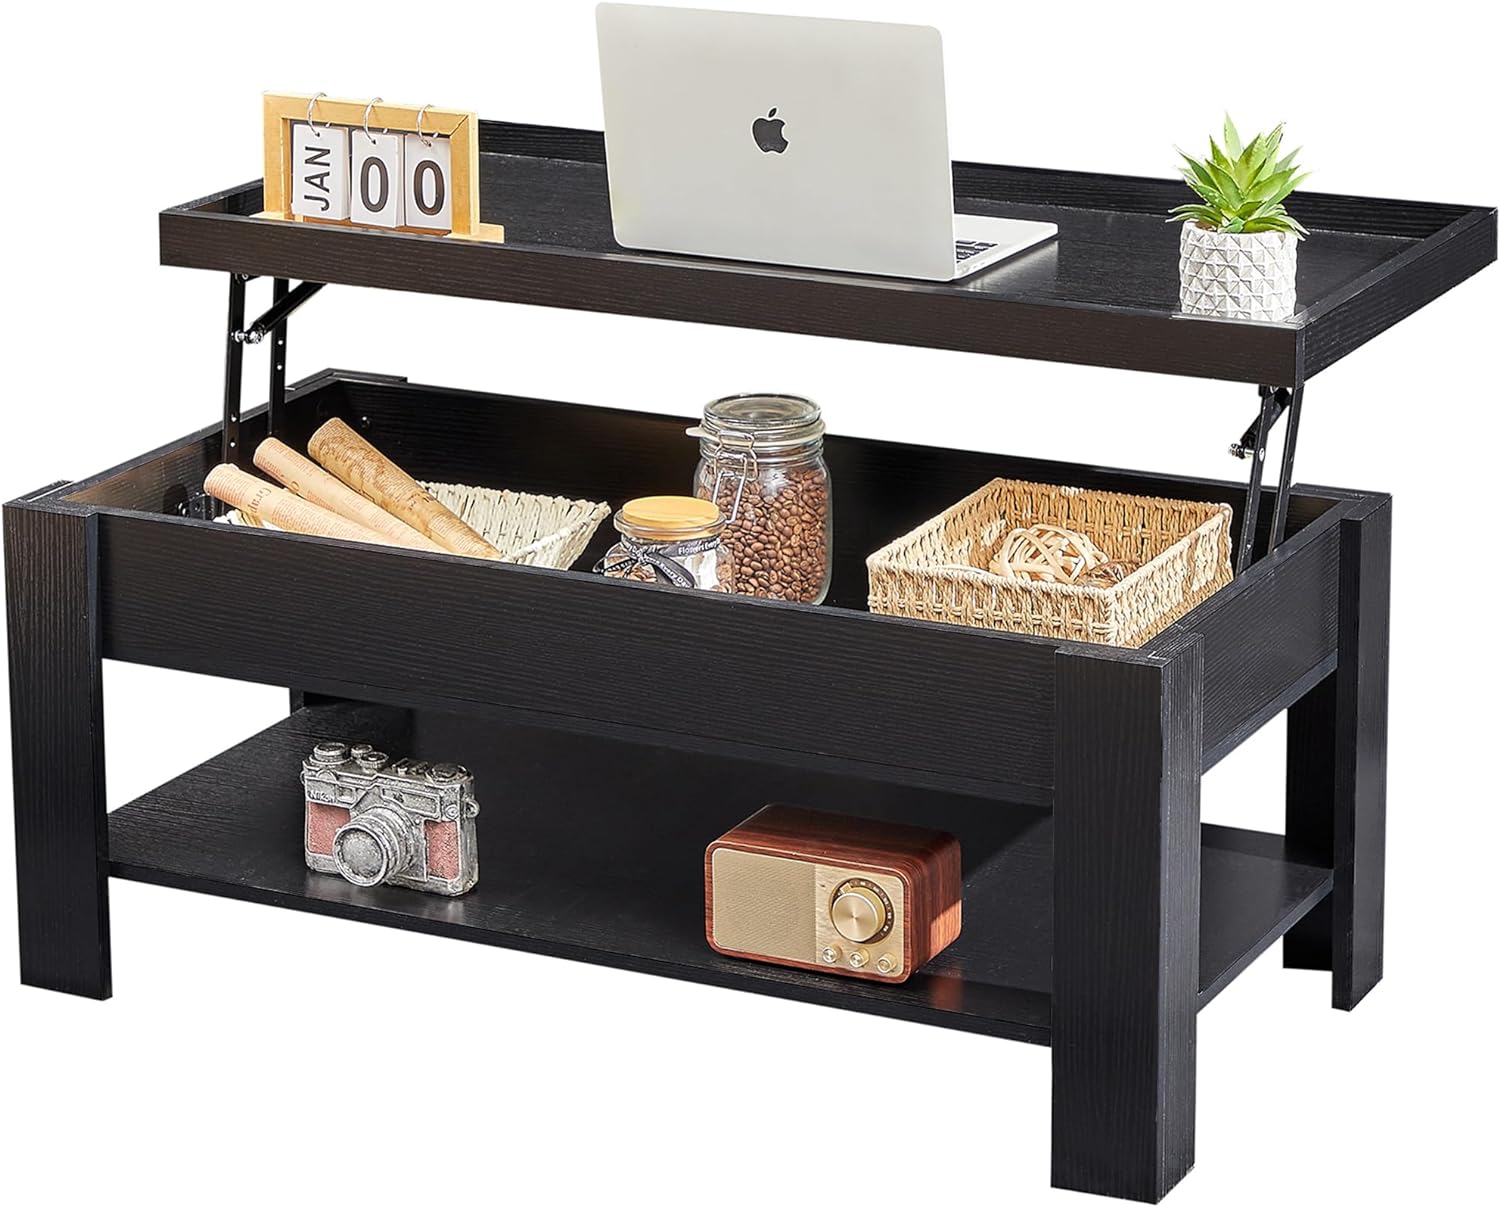 VECELO Lift Top Coffee Table with Storage Shelf